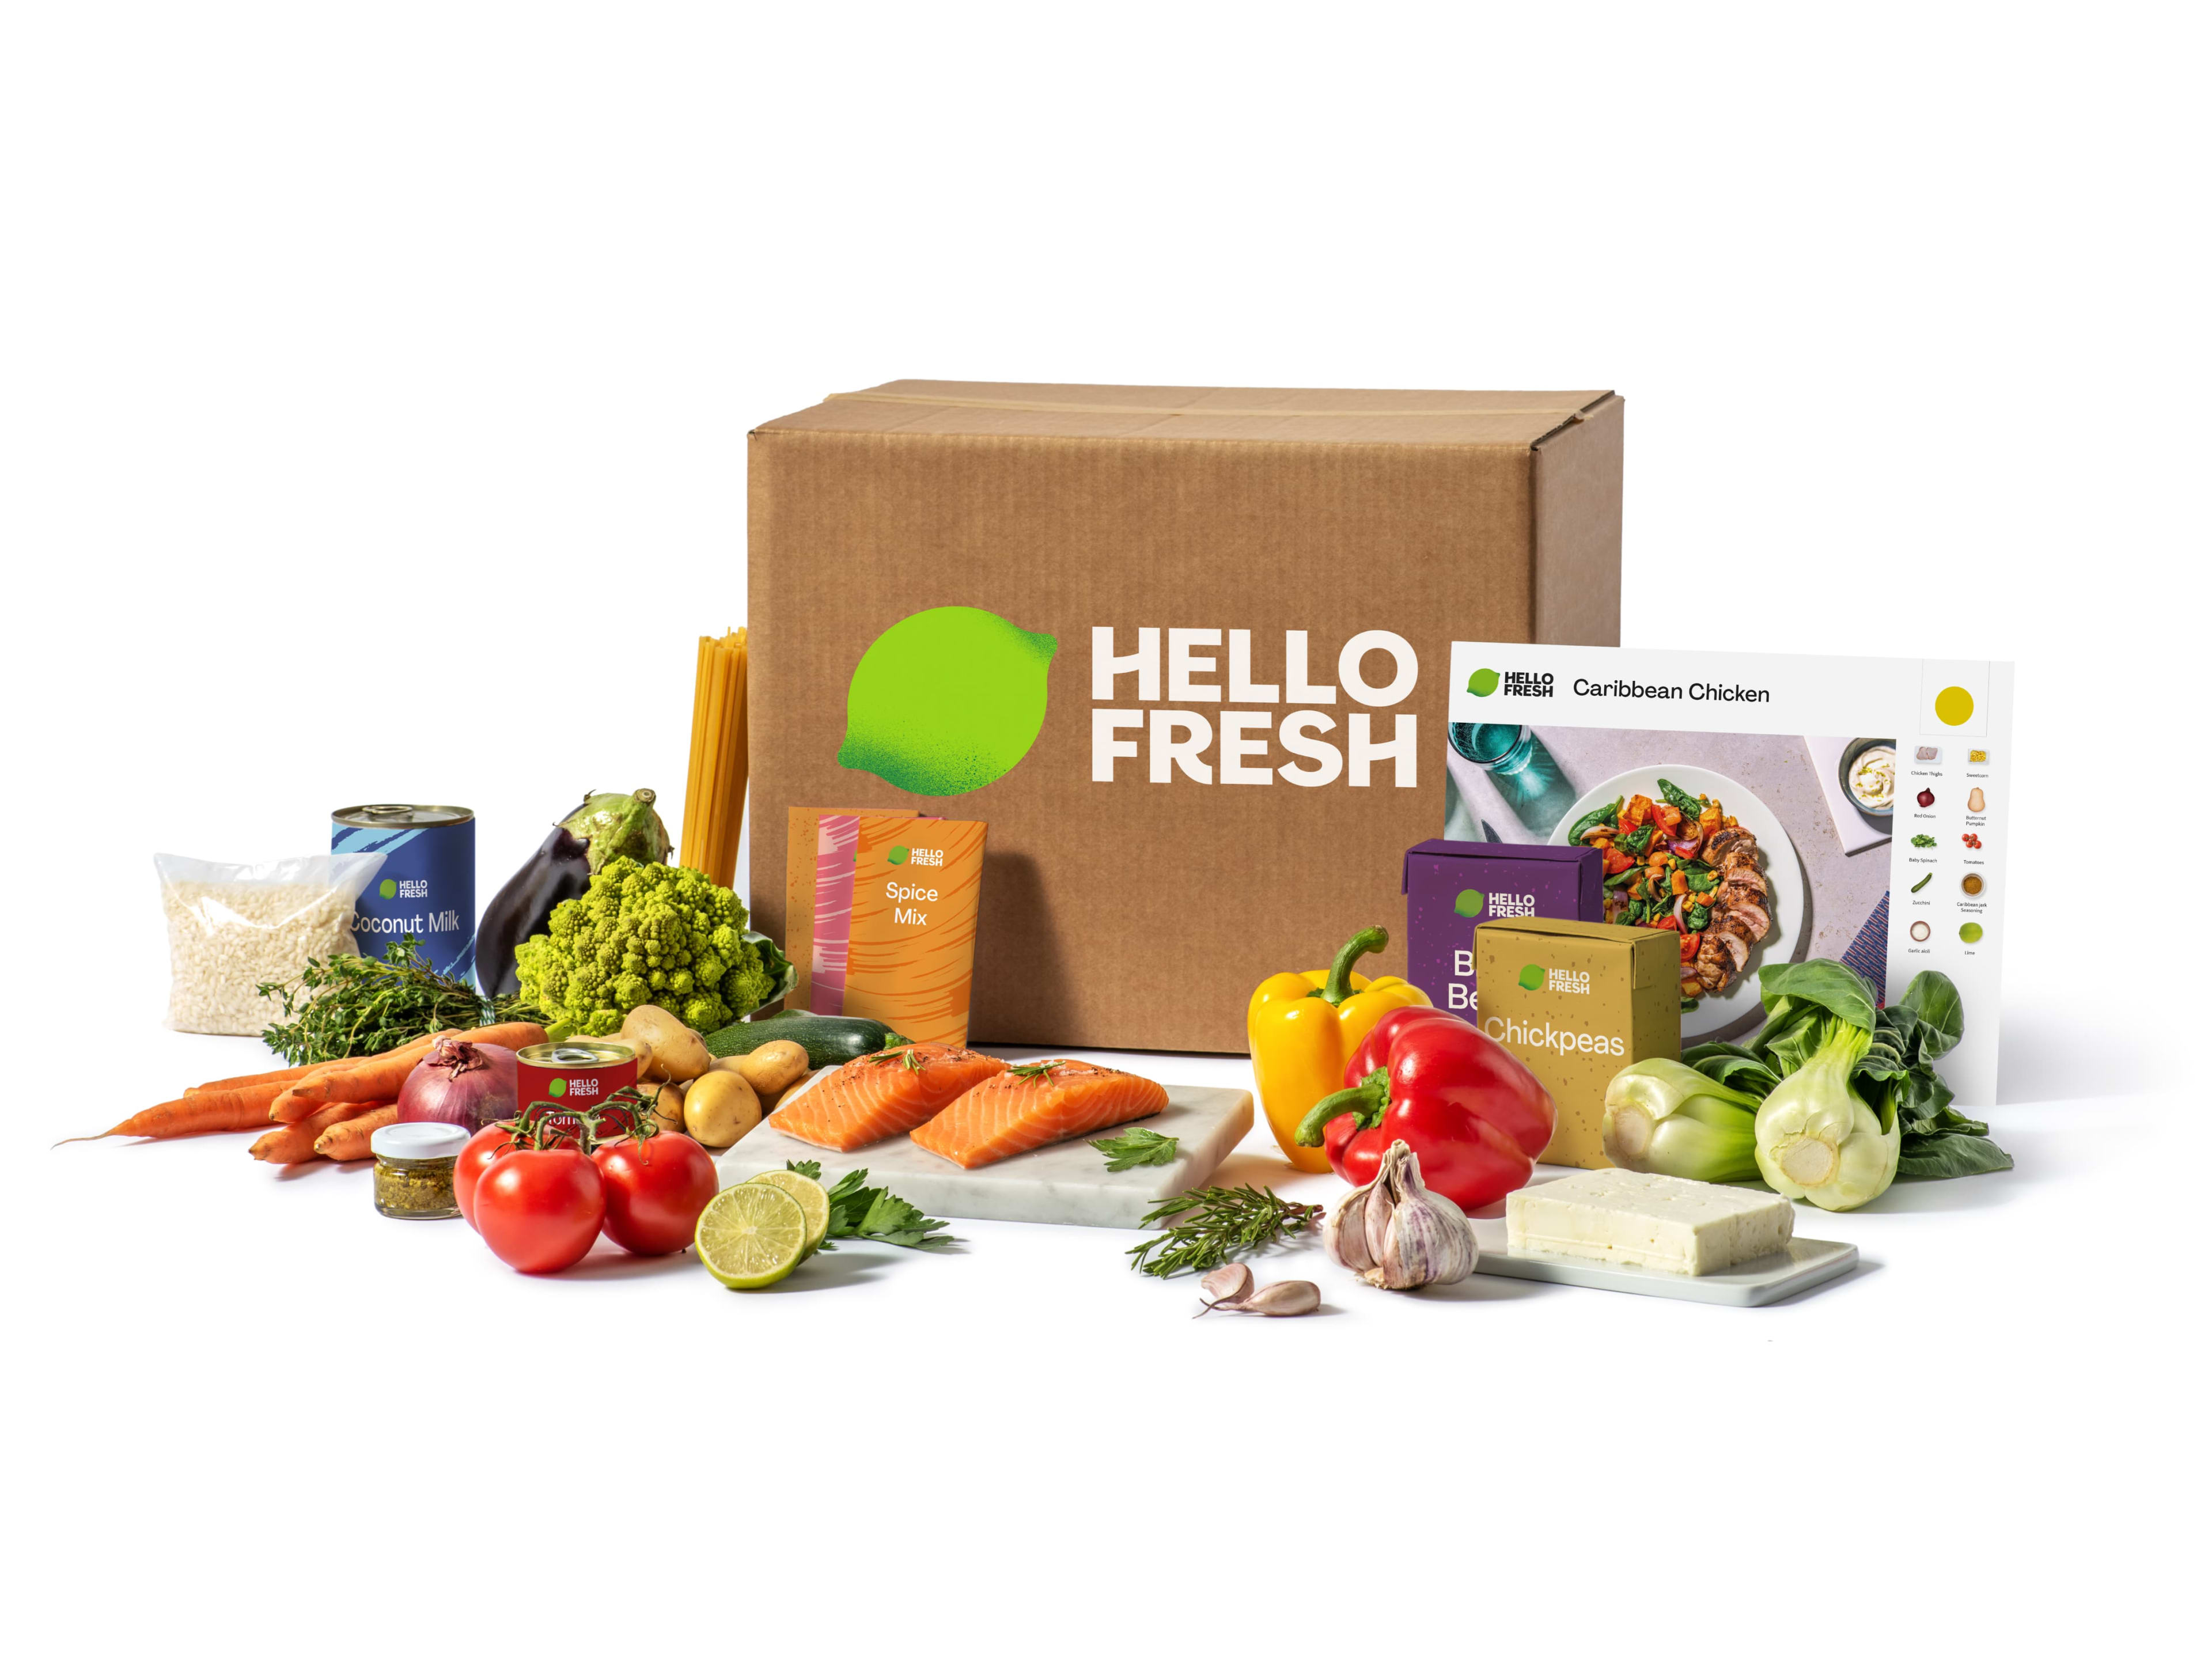 What's inside each meal box delivery?